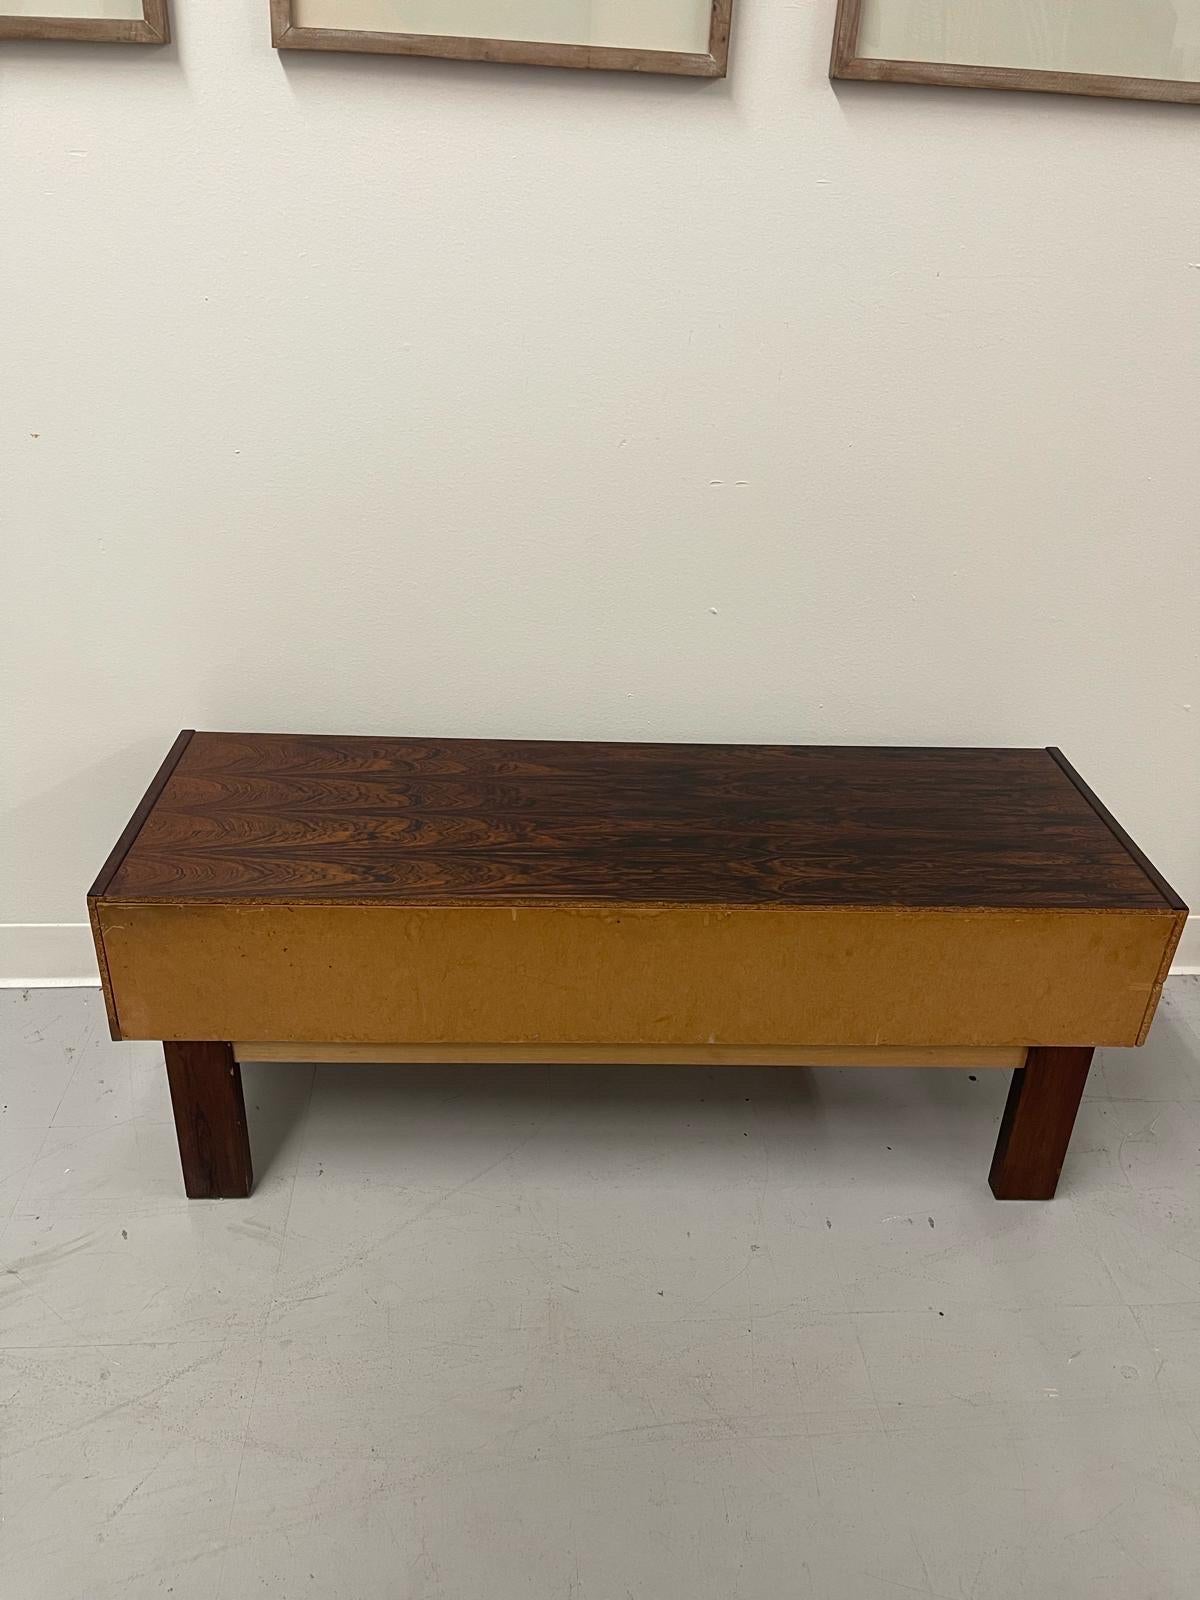 Imported Vintage Danish Modern Rosewood Low Console Coffee Table with wood inlay For Sale 5